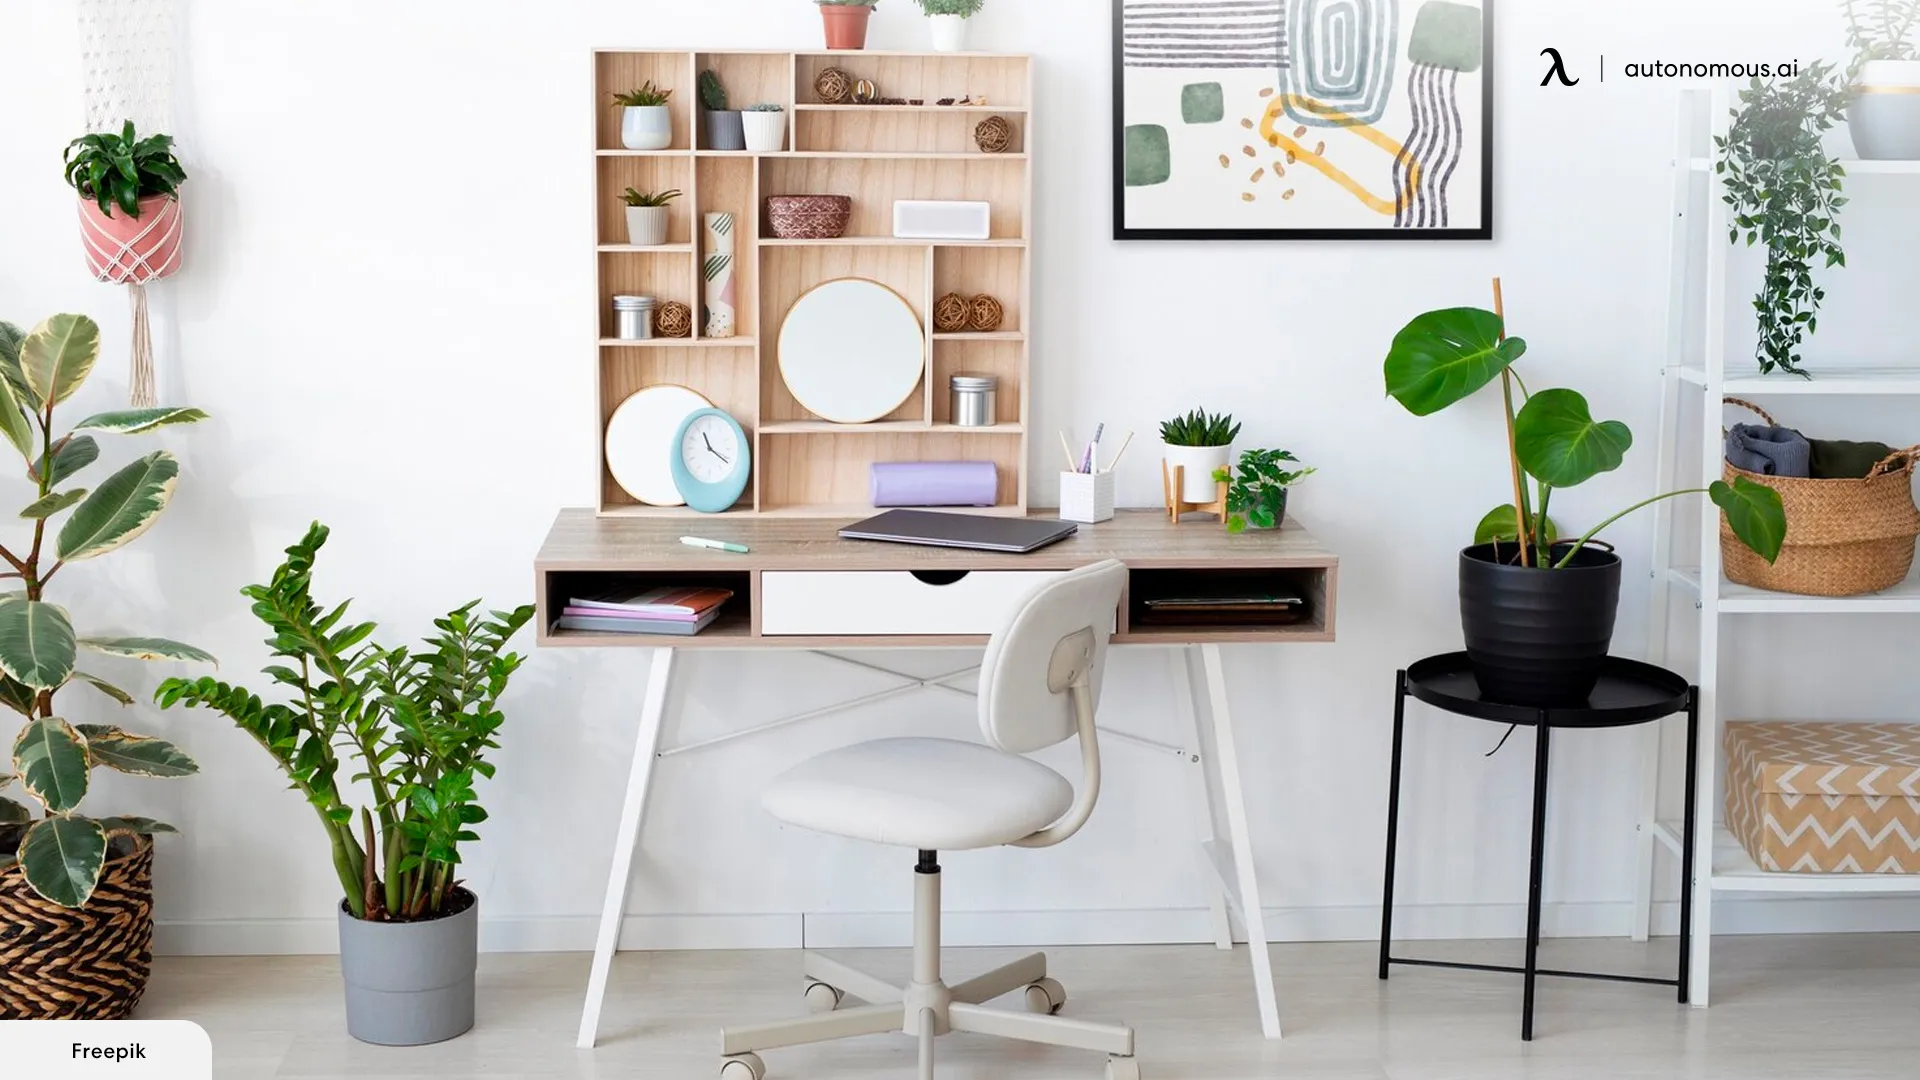 Add Plants to Your Setup - Small office décor ideas for work